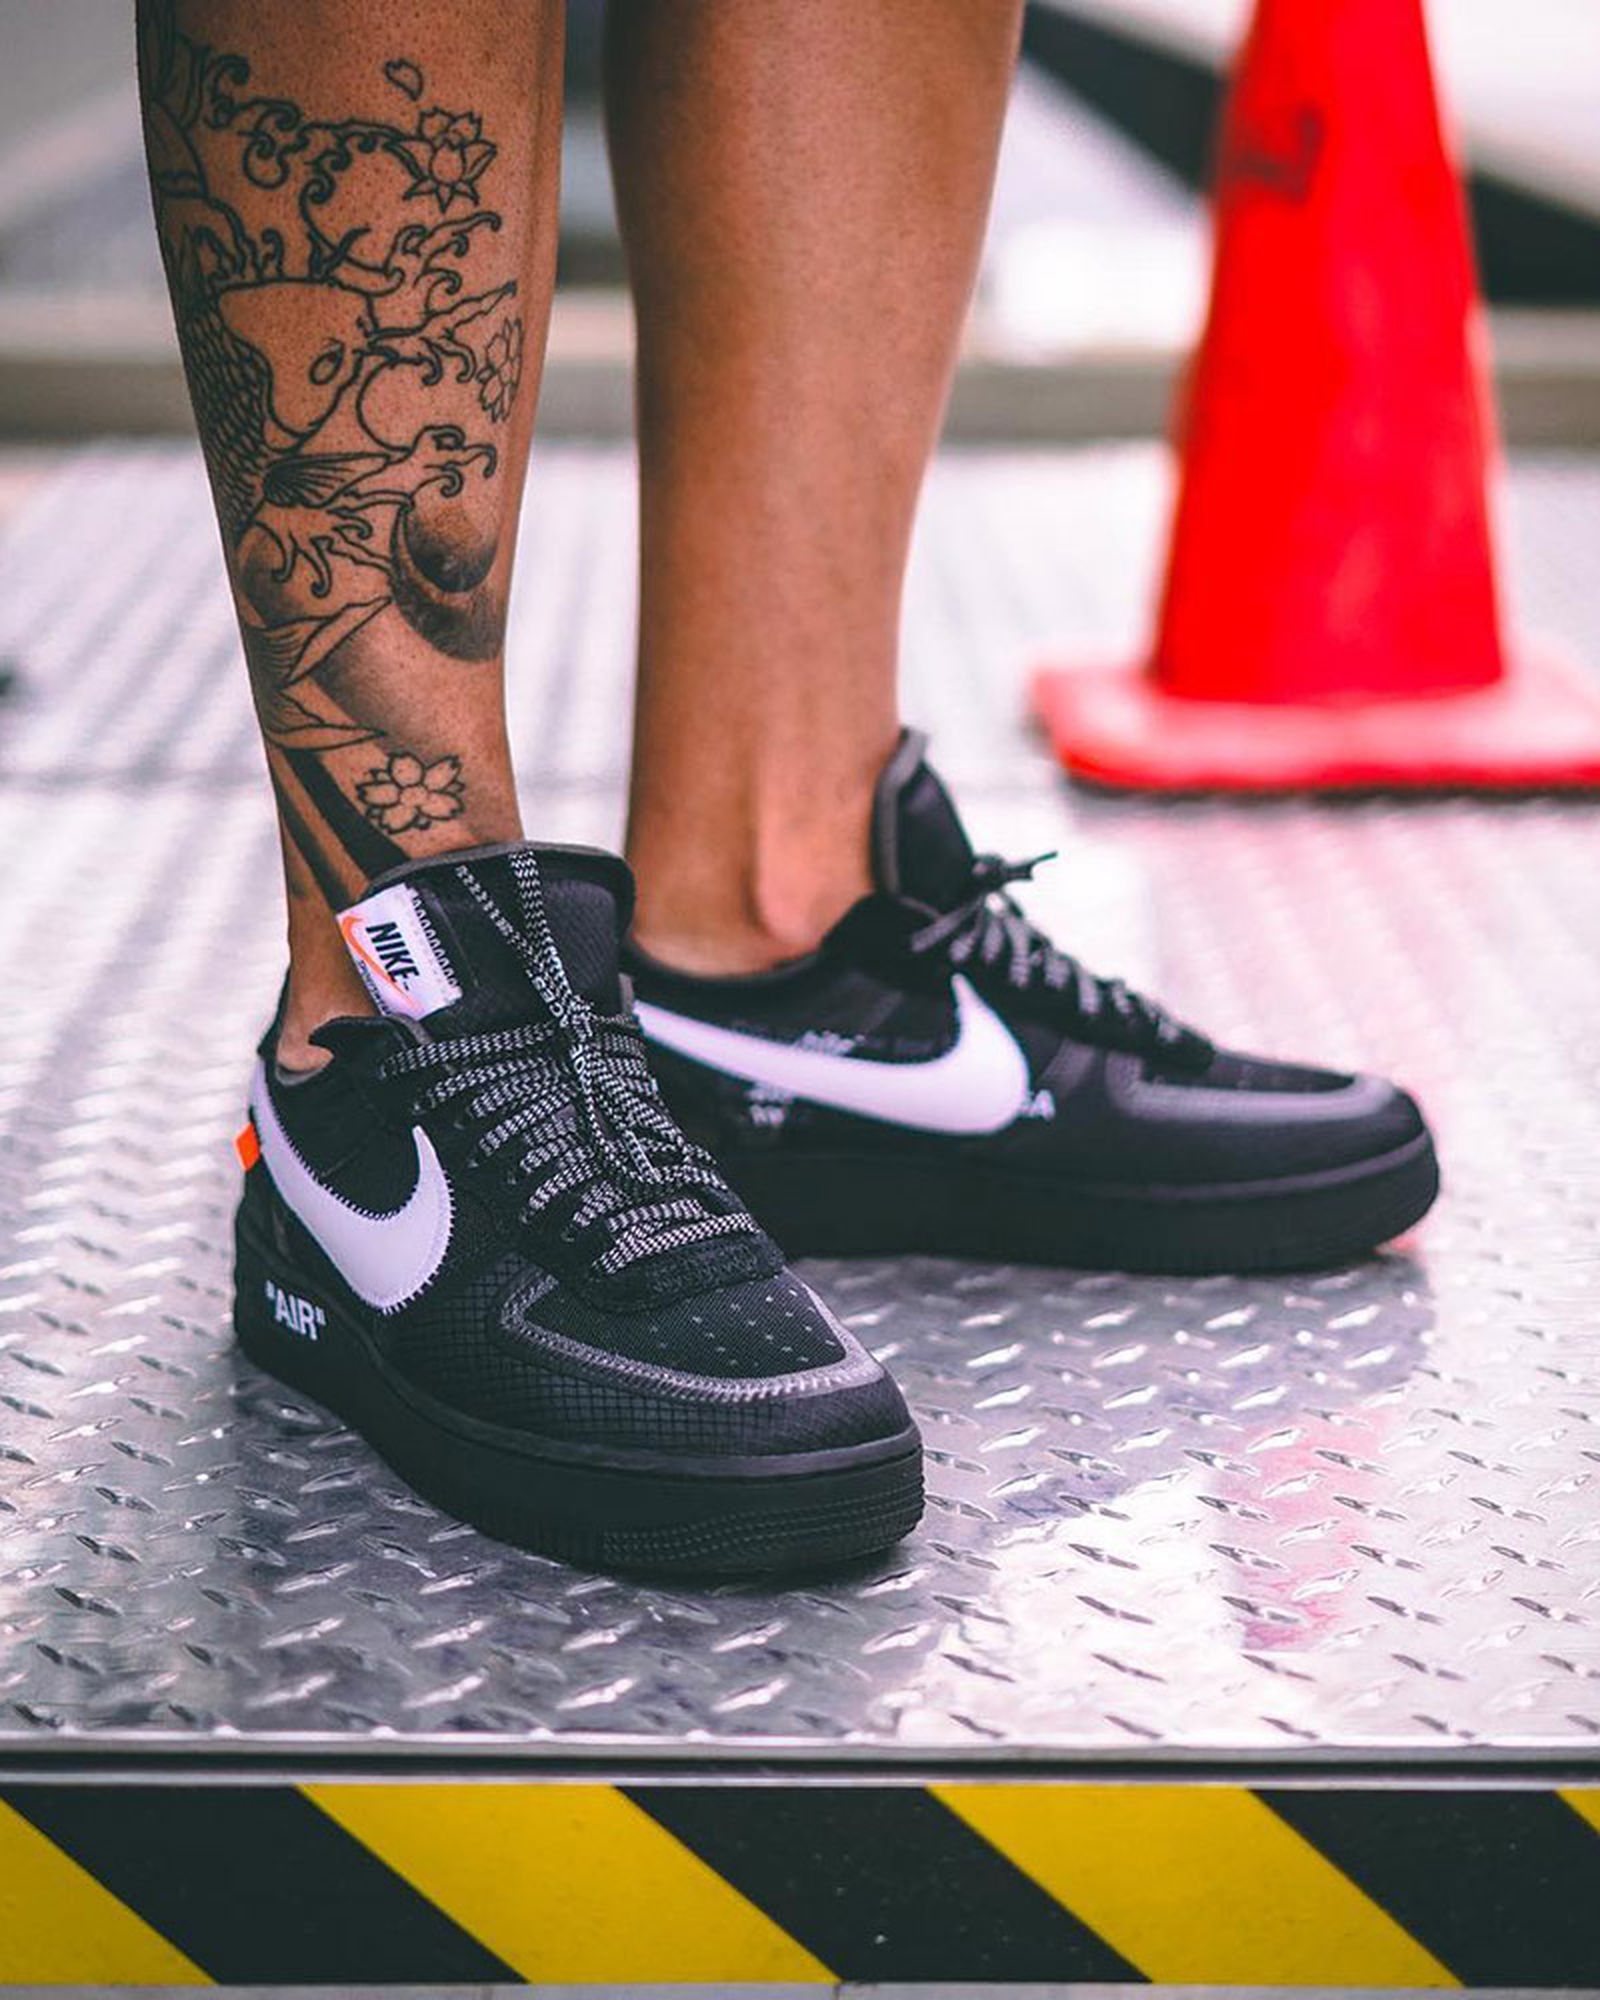 OFF-WHITE x Air 1 “Black”: On-Foot Pictures